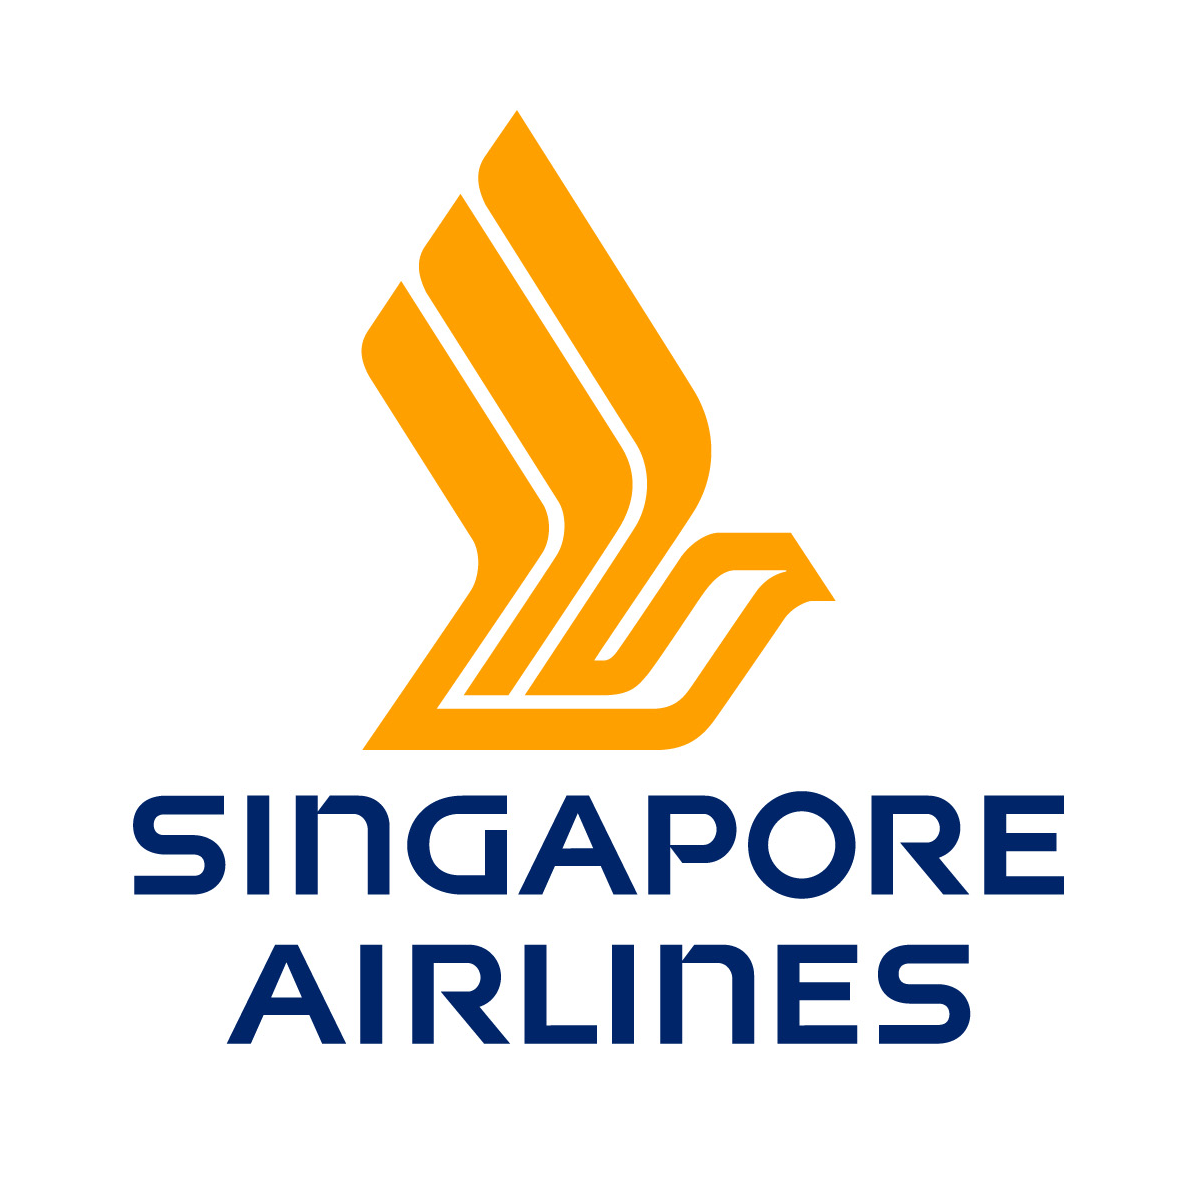 Singapore Airlines Logo - Singapore Airlines Vector, Transparent background PNG HD thumbnail